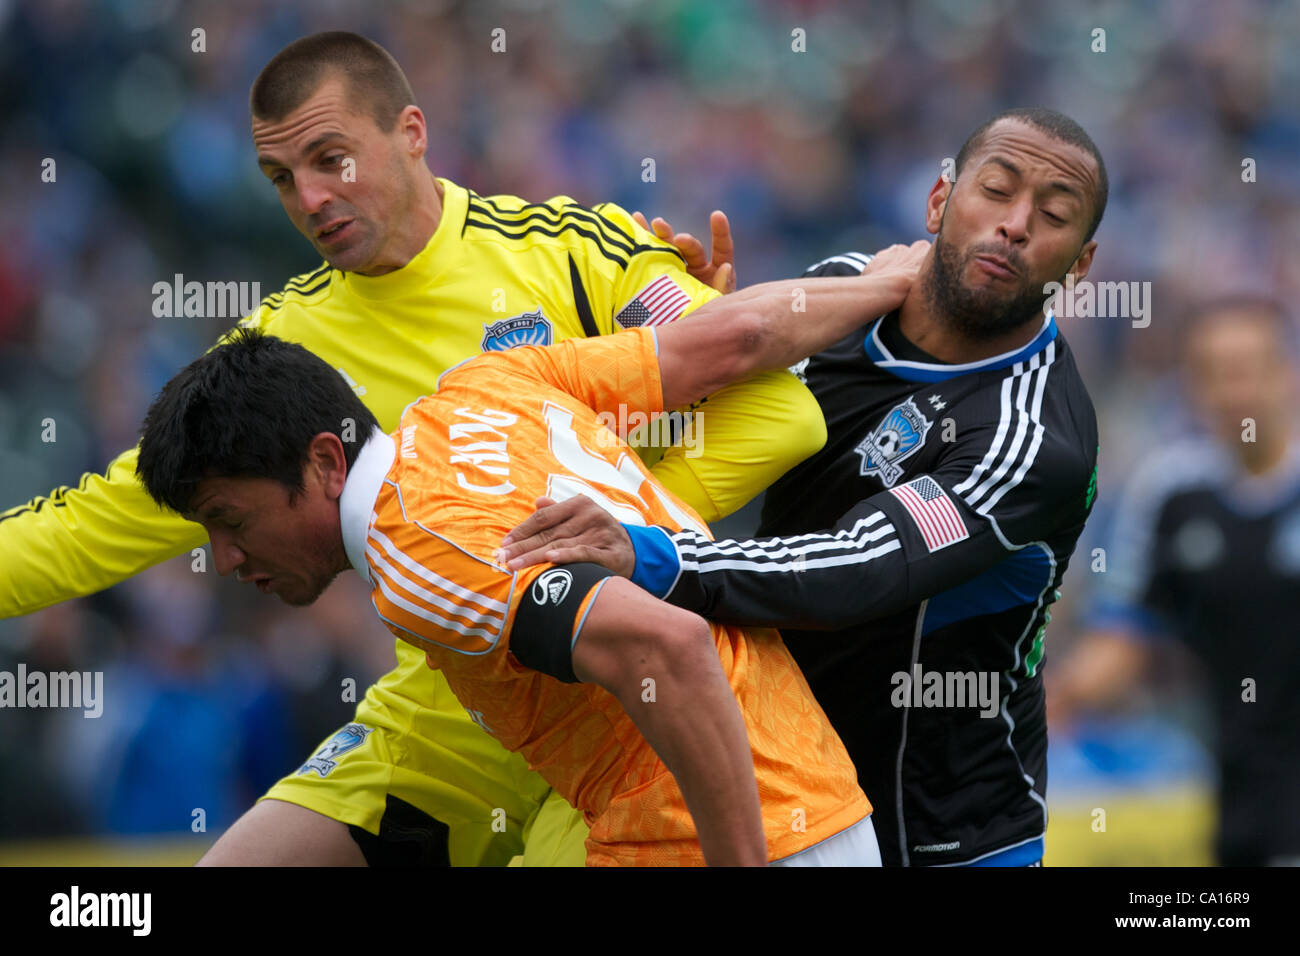 March 17, 2012 - San Francisco, California, U.S - Earthquakes goalkeeper Jon Busch (18) and defender Victor Bernardez (26) foul Dynamo forward Brian Ching (25) in the box during the MLS match between the San Jose Earthquakes and Houston Dynamo at AT&T Park in San Francisco, CA.  The Dynamo lead 1-0  Stock Photo